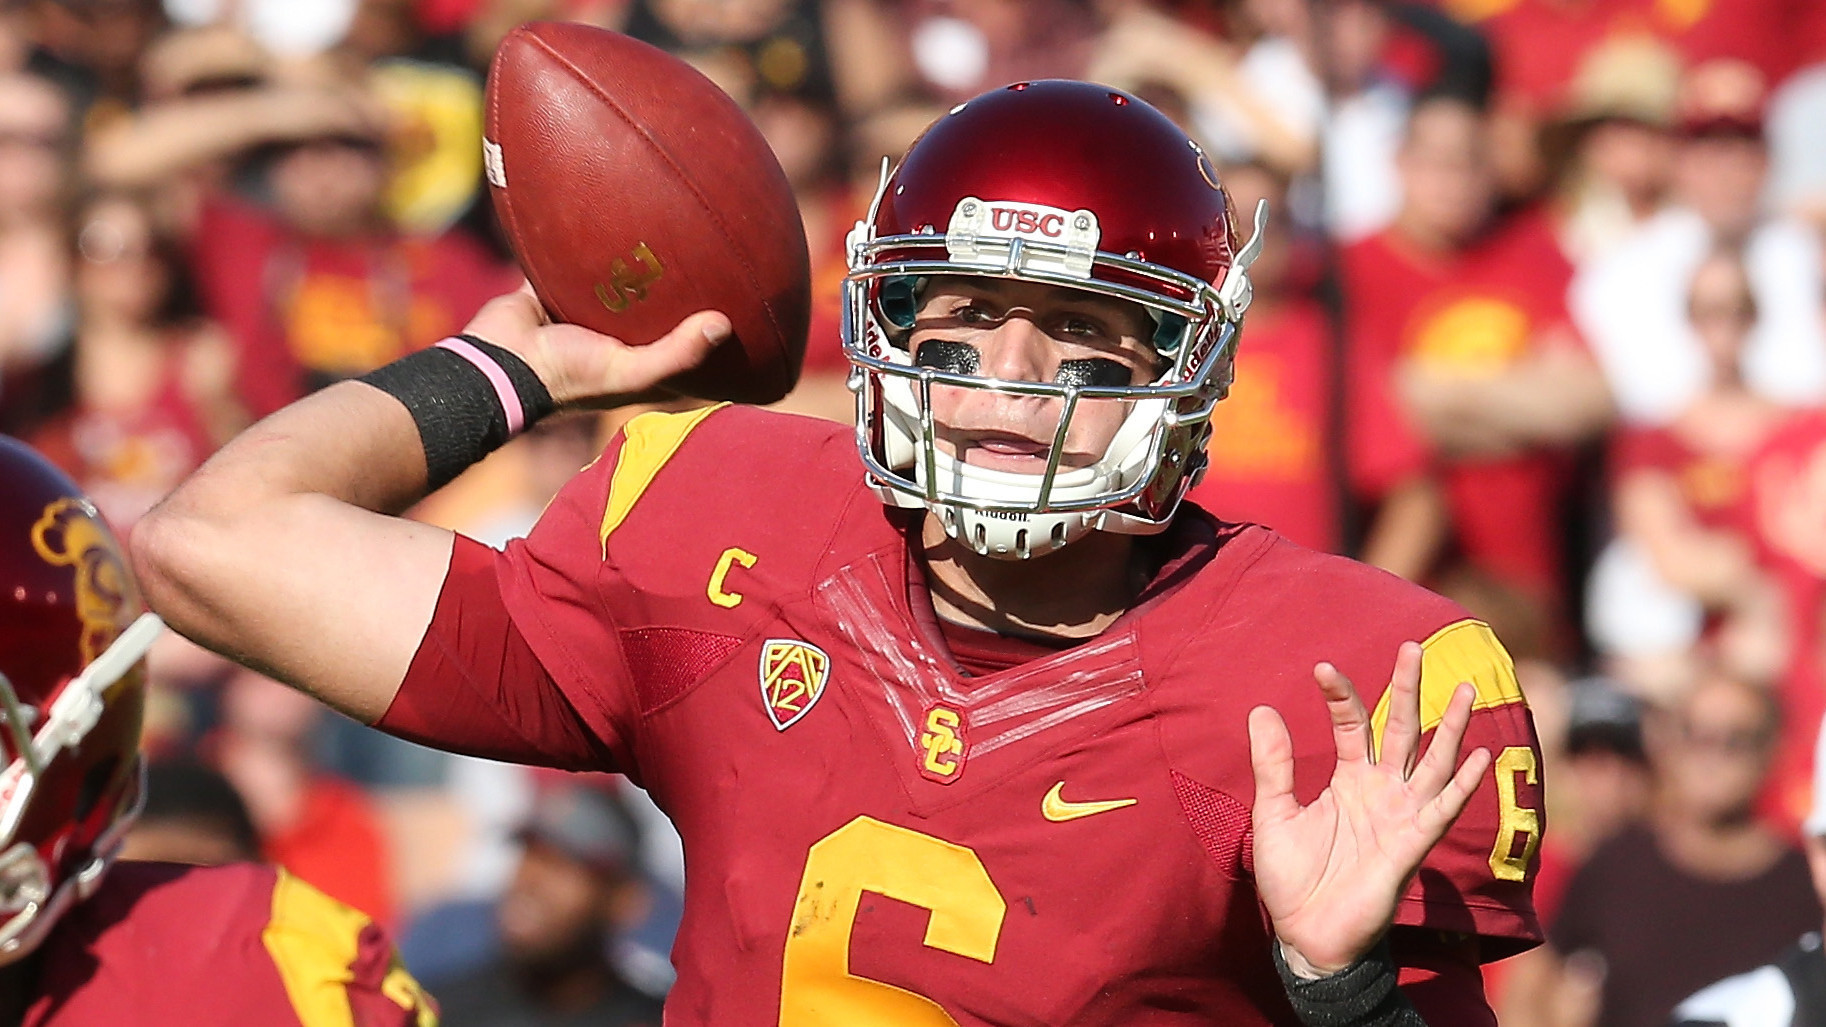 Download this Usc Cody Kessler Ranks Sixth Passing Still Has Room picture